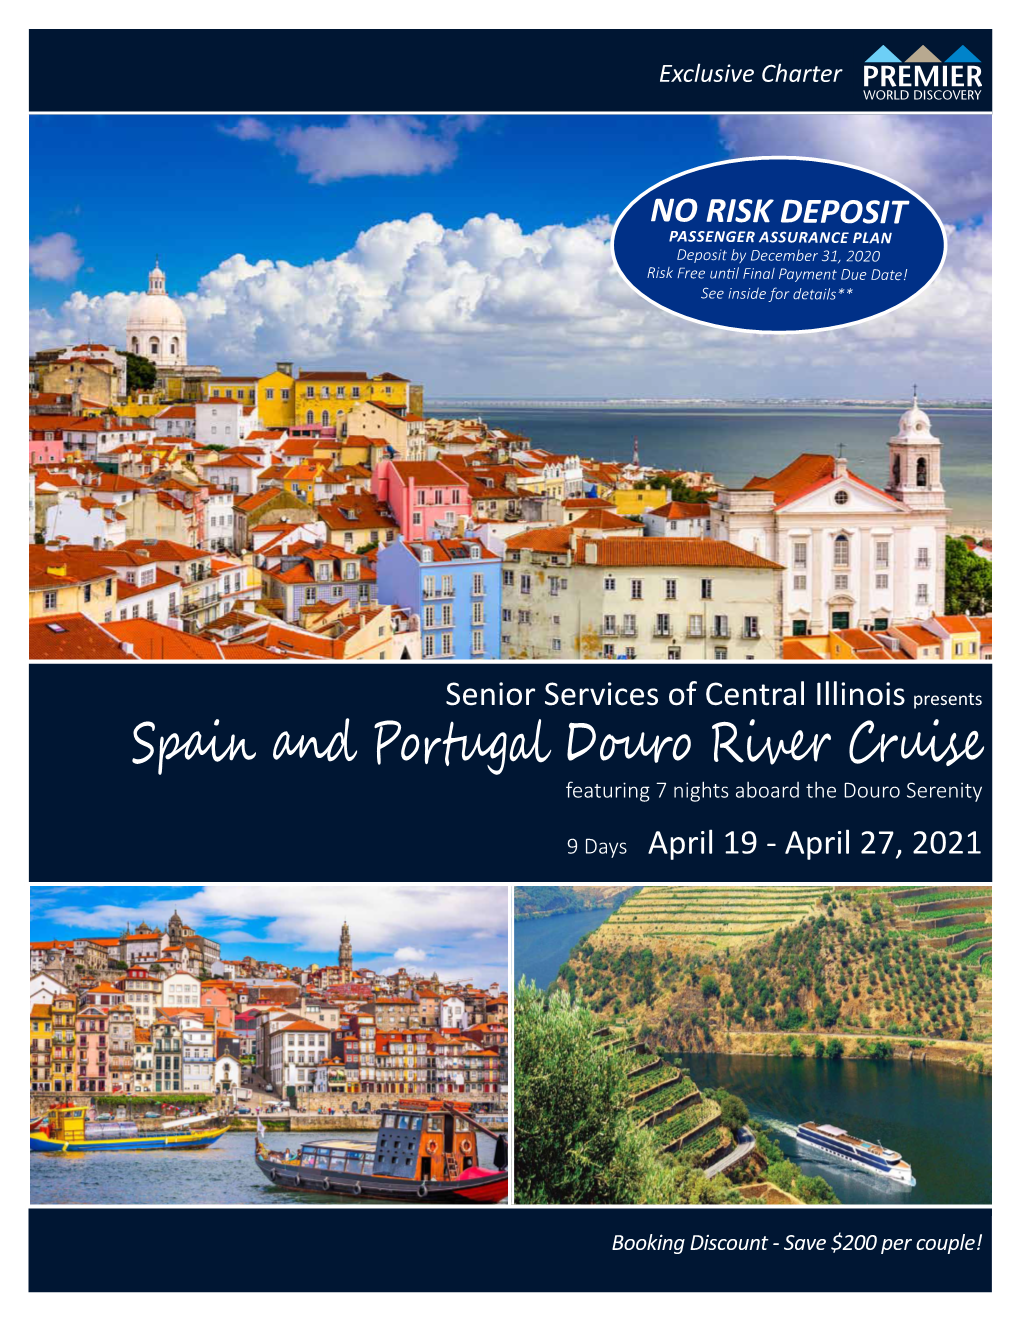 Spain and Portugal Douro River Cruise Featuring 7 Nights Aboard the Douro Serenity